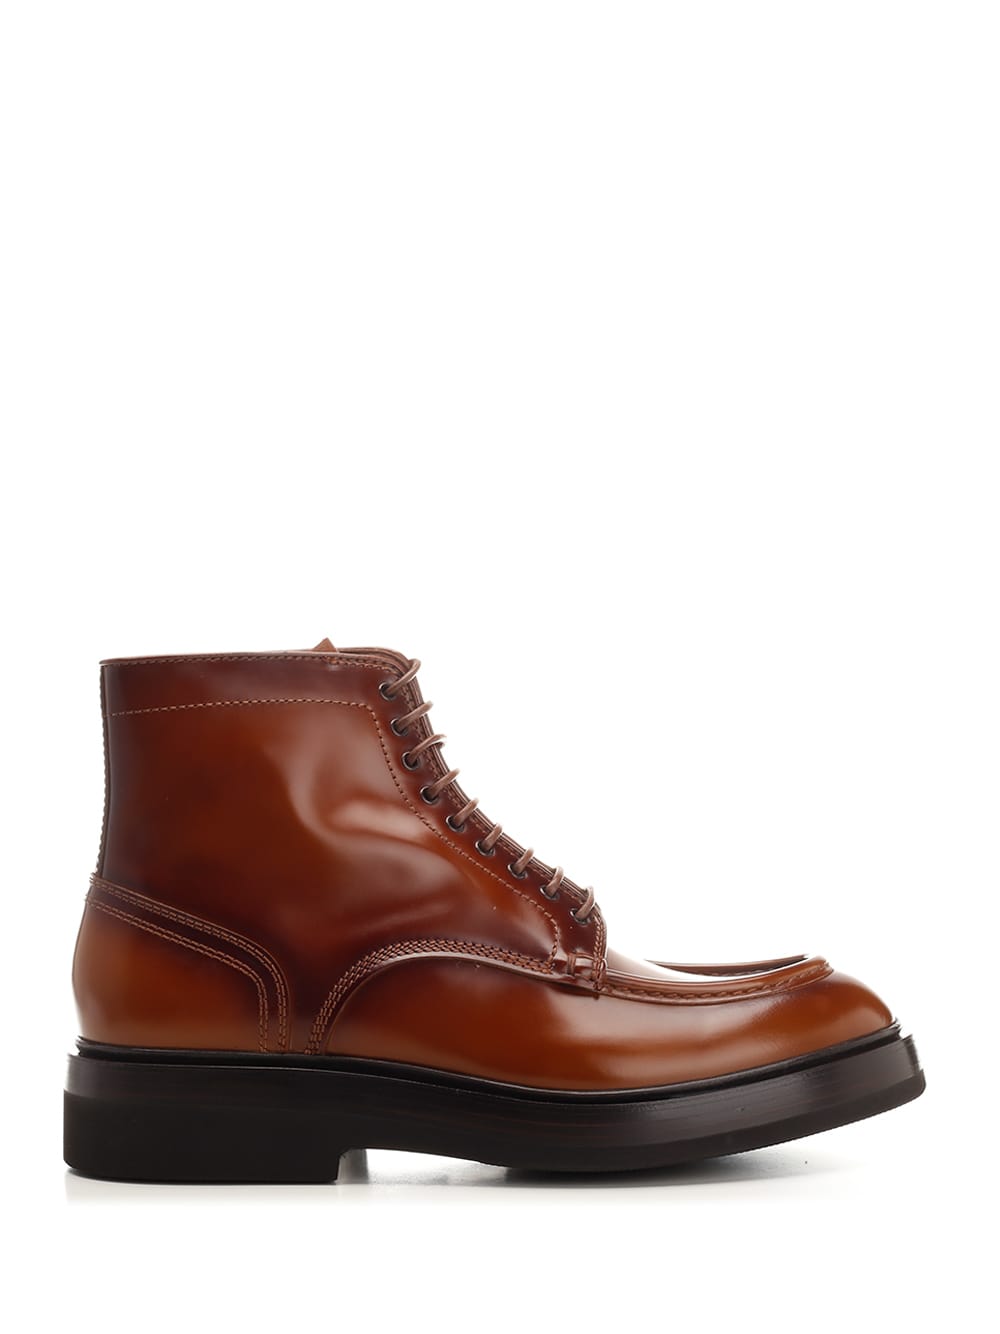 SANTONI BROWN LEATHER ANKLE BOOT